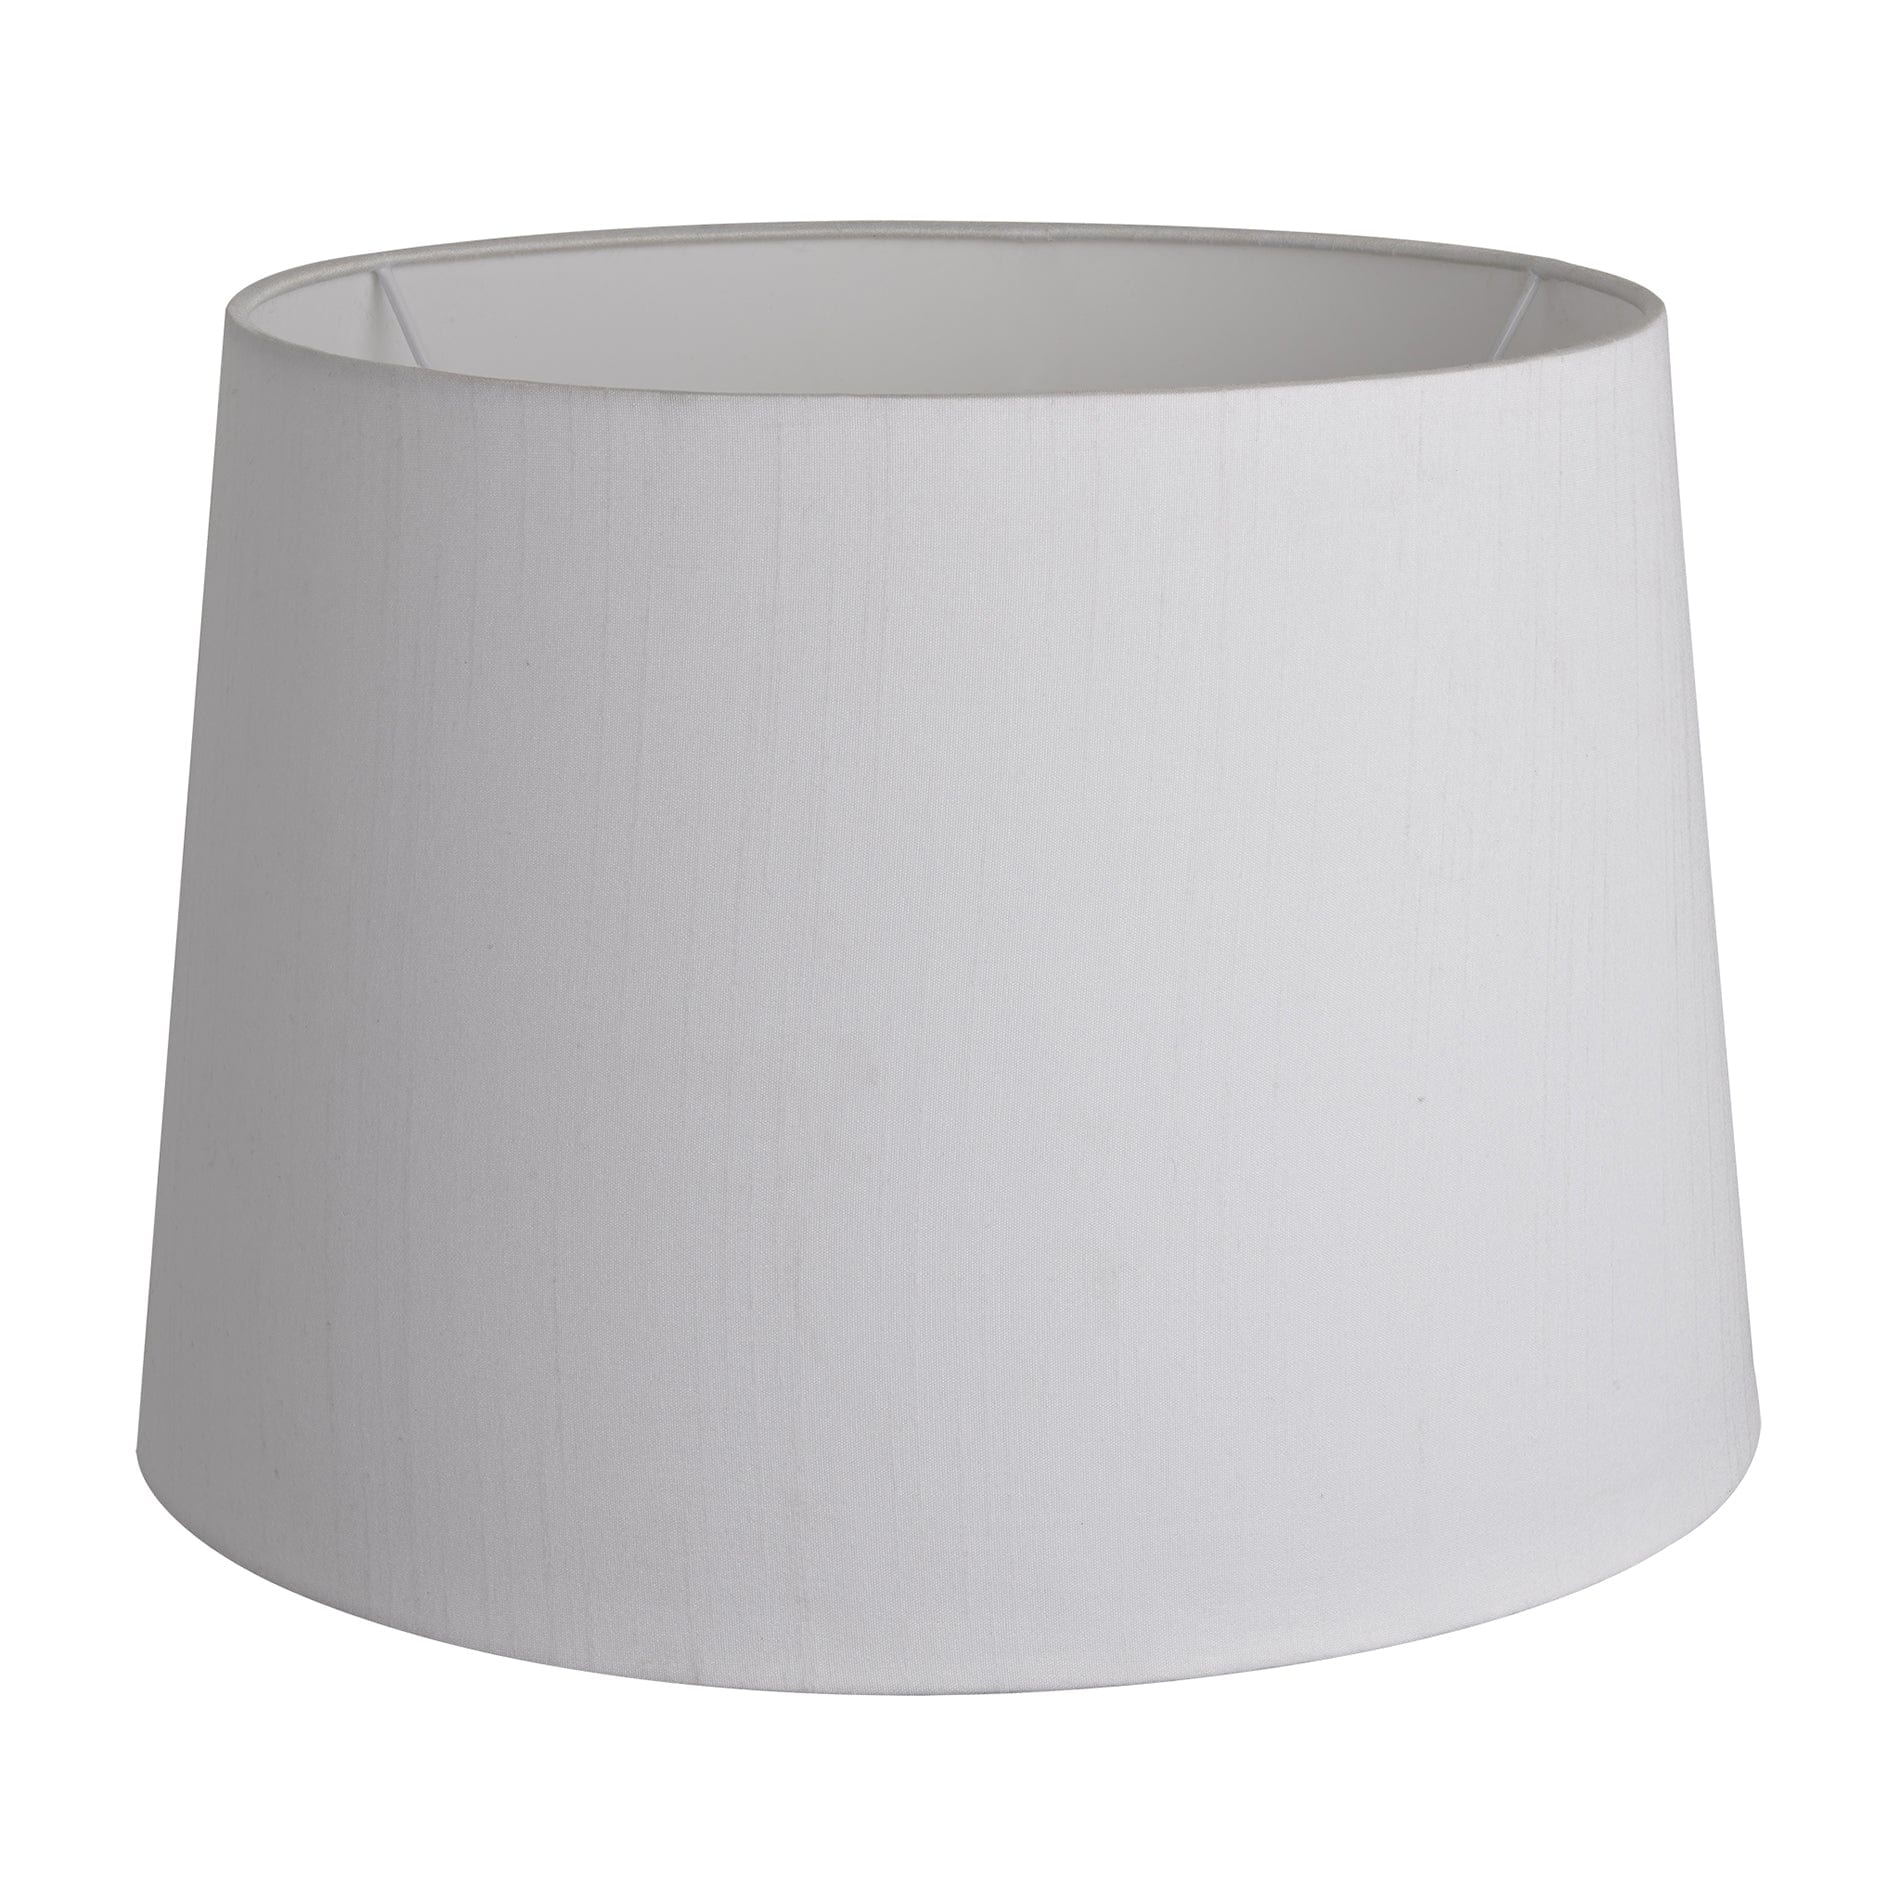 Empire - Large - White Dupion Silk - Lampshade Only Industville EM-L-WDS-LSO